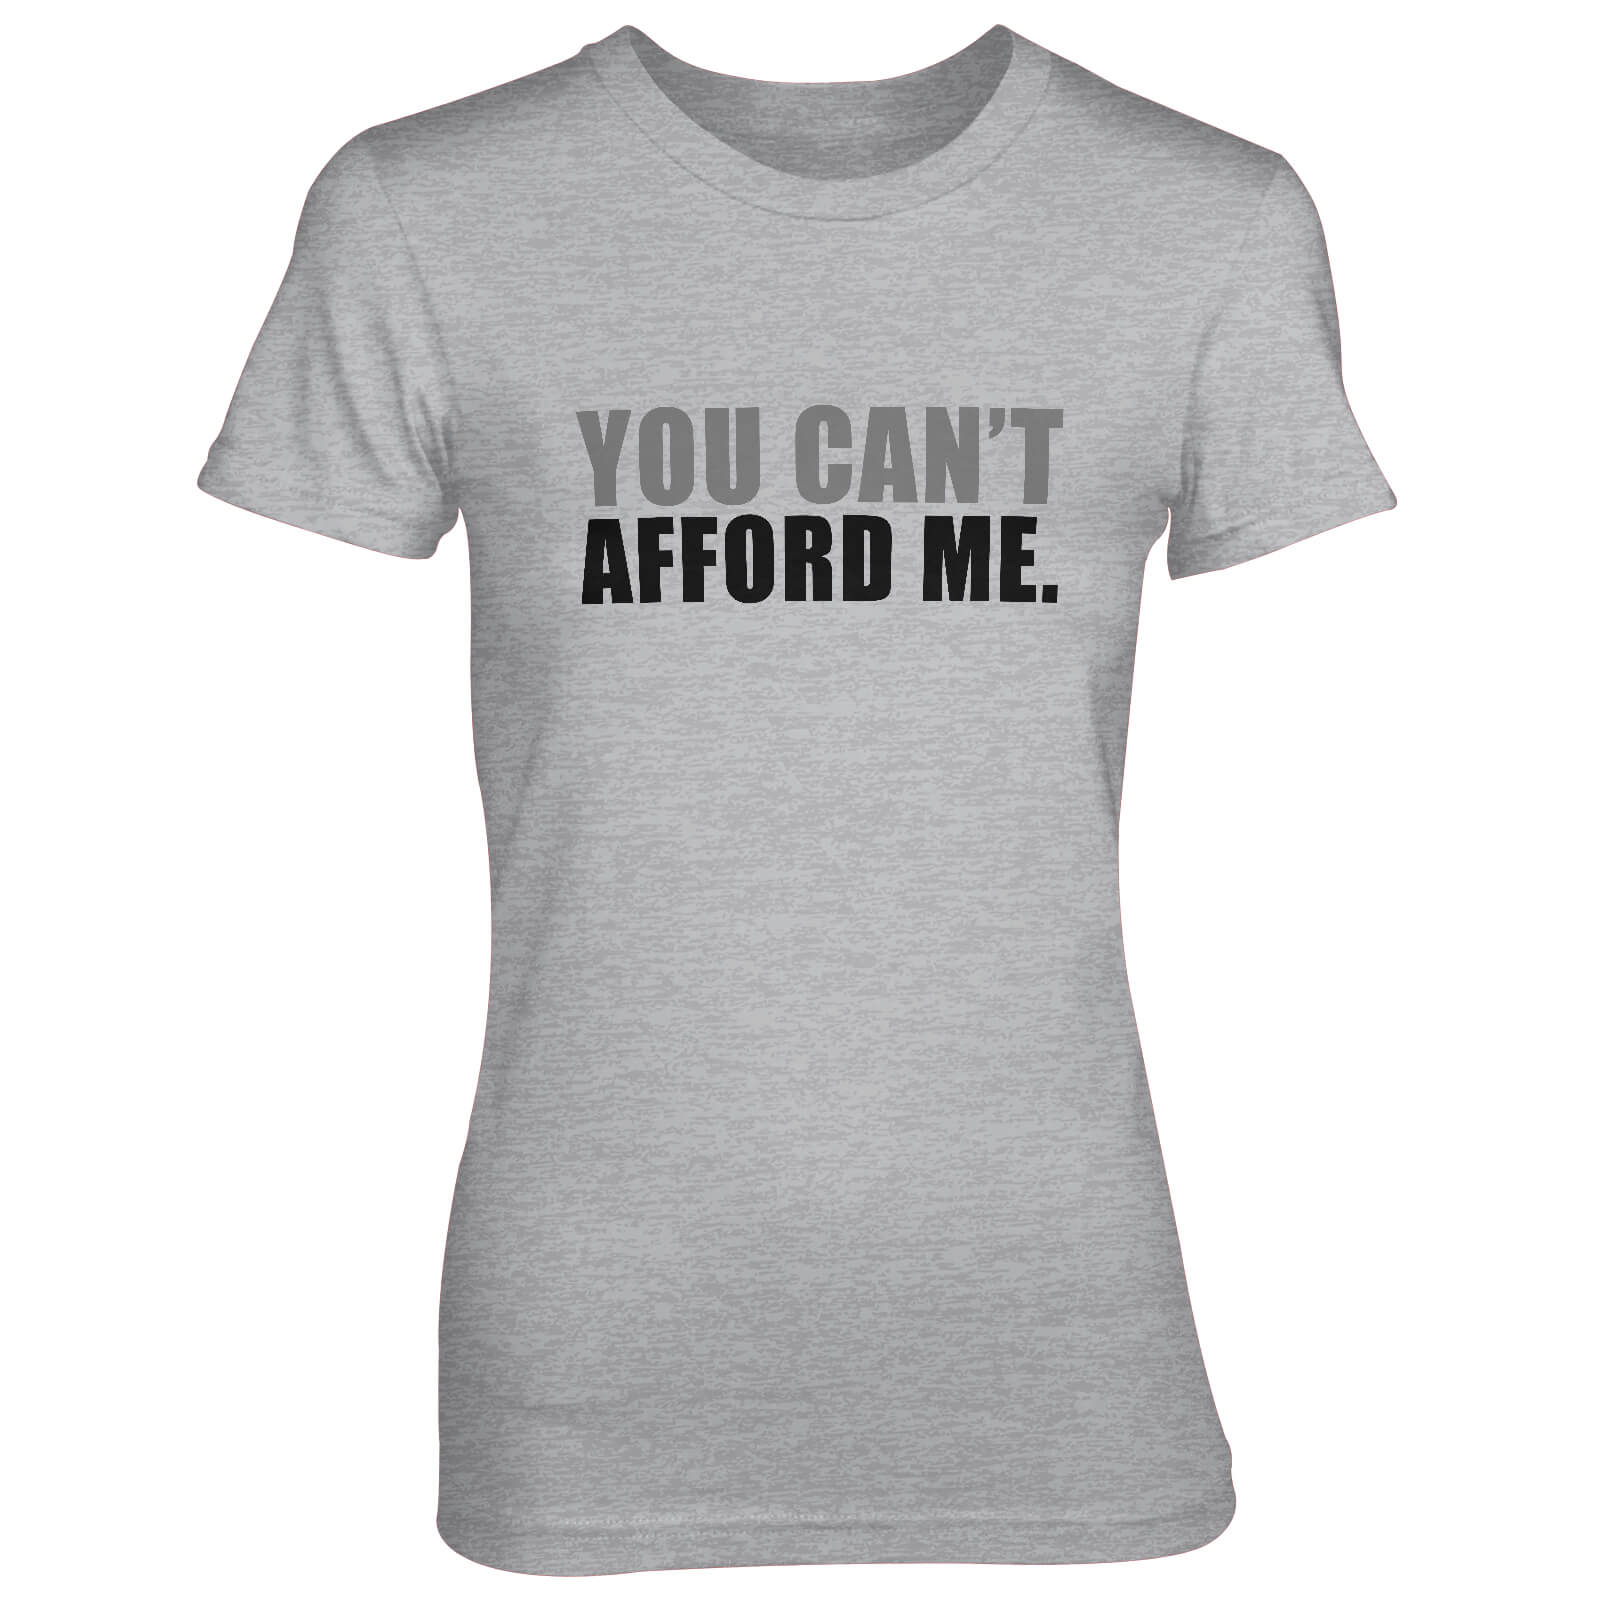 You Can't Afford Me Women's Grey T-Shirt - S - Grey